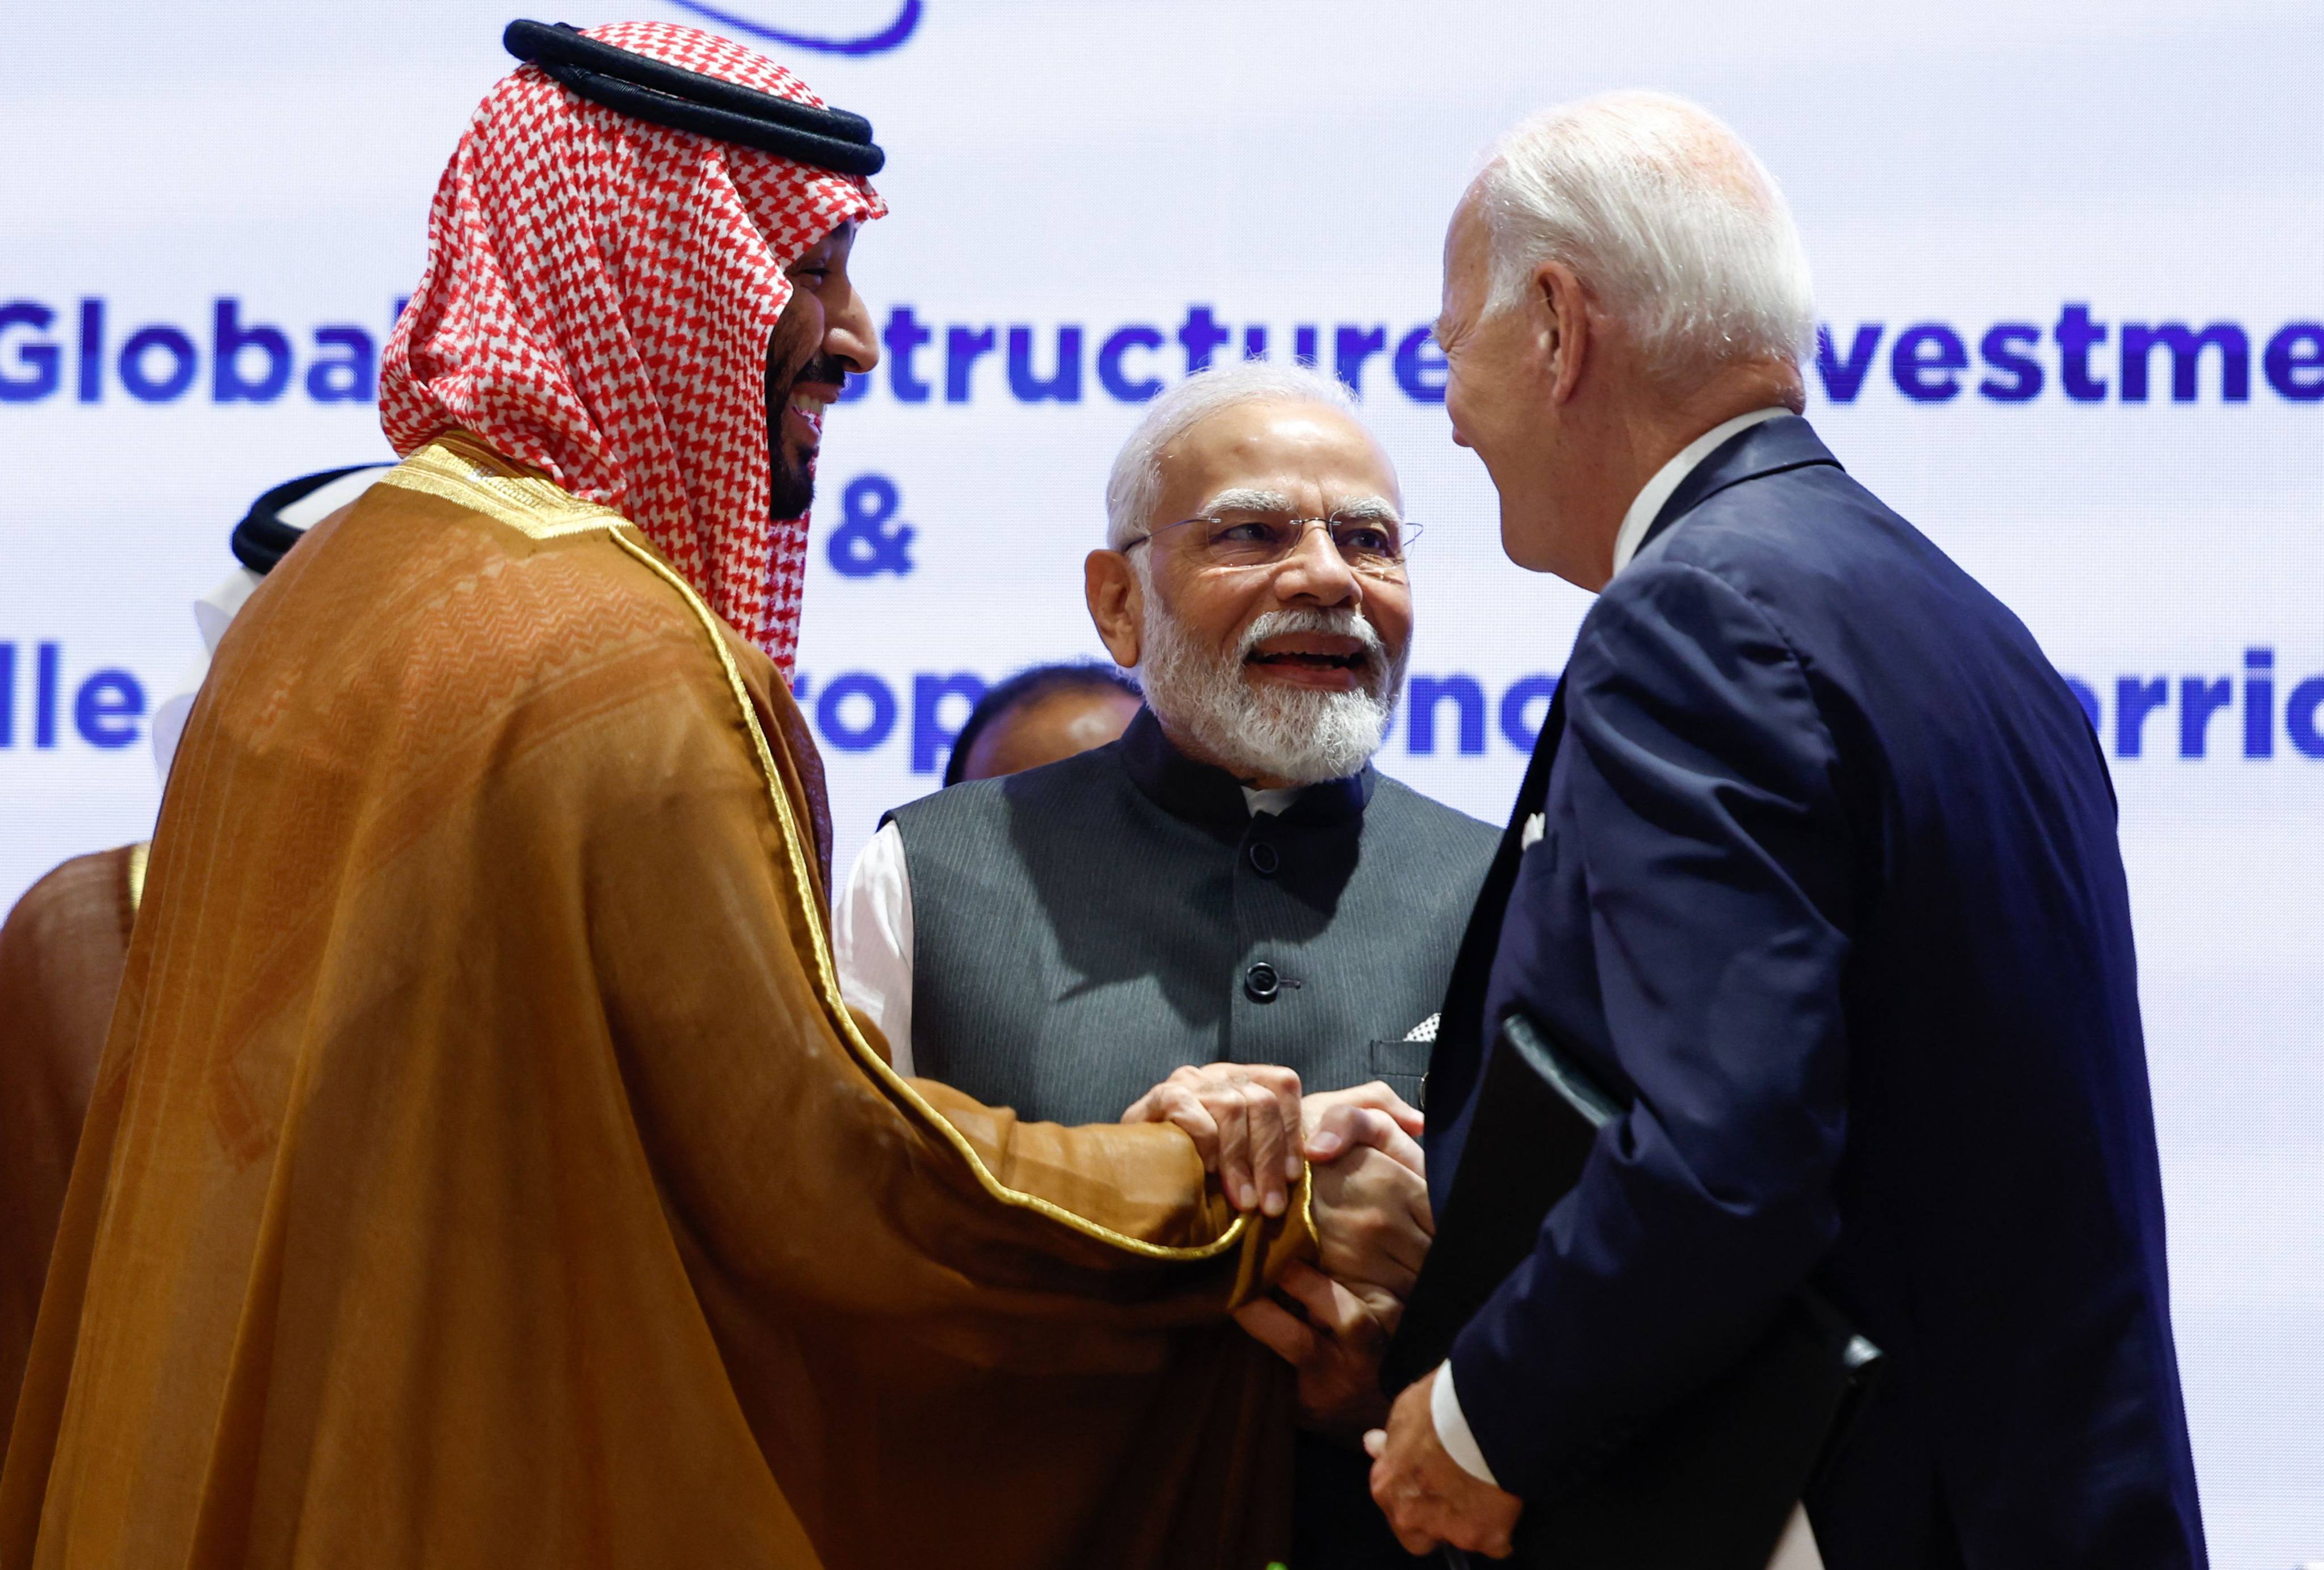 Saudi Arabia’s Crown Prince Mohammed bin Salman, India’s Prime Minister Narendra Modi and US President Joe Biden at the G20 summit. A new US-led project is purported to build infrastructure links between India, the Middle East and Europe. Photo: AFP